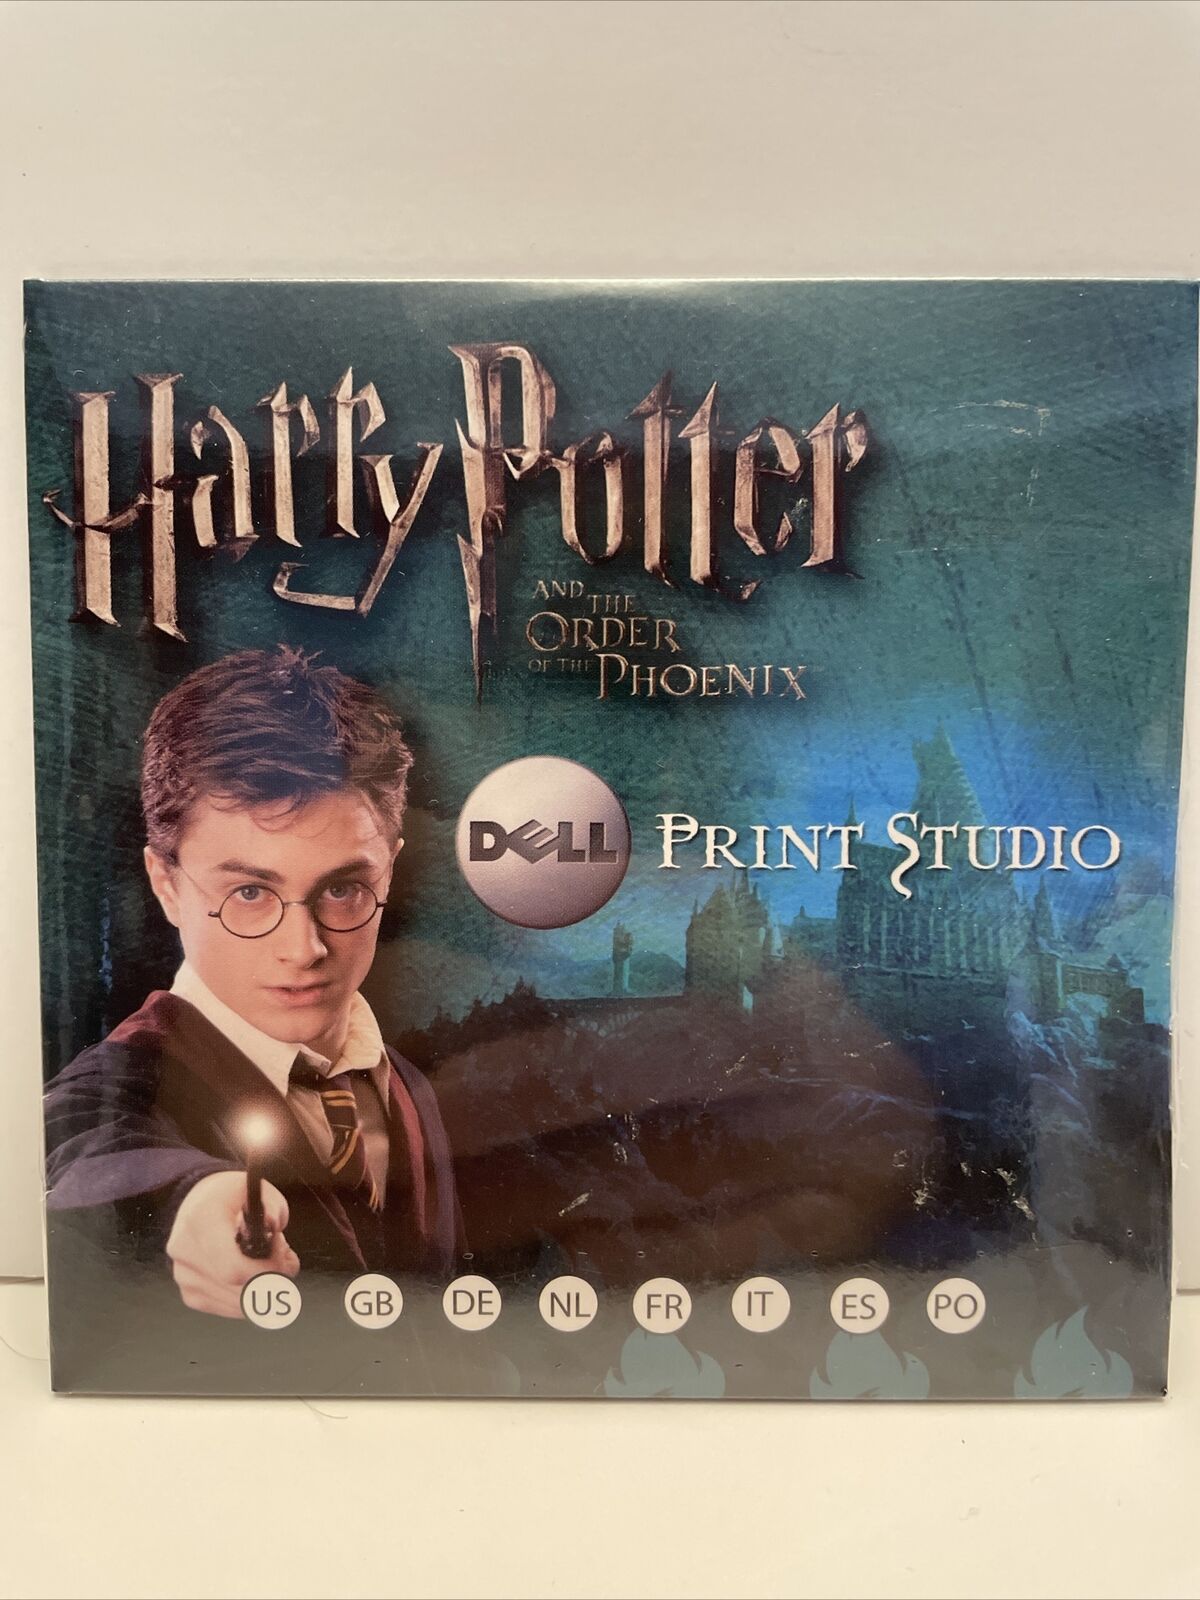 Harry Potter and the order of the phoenix Dell Print Studio